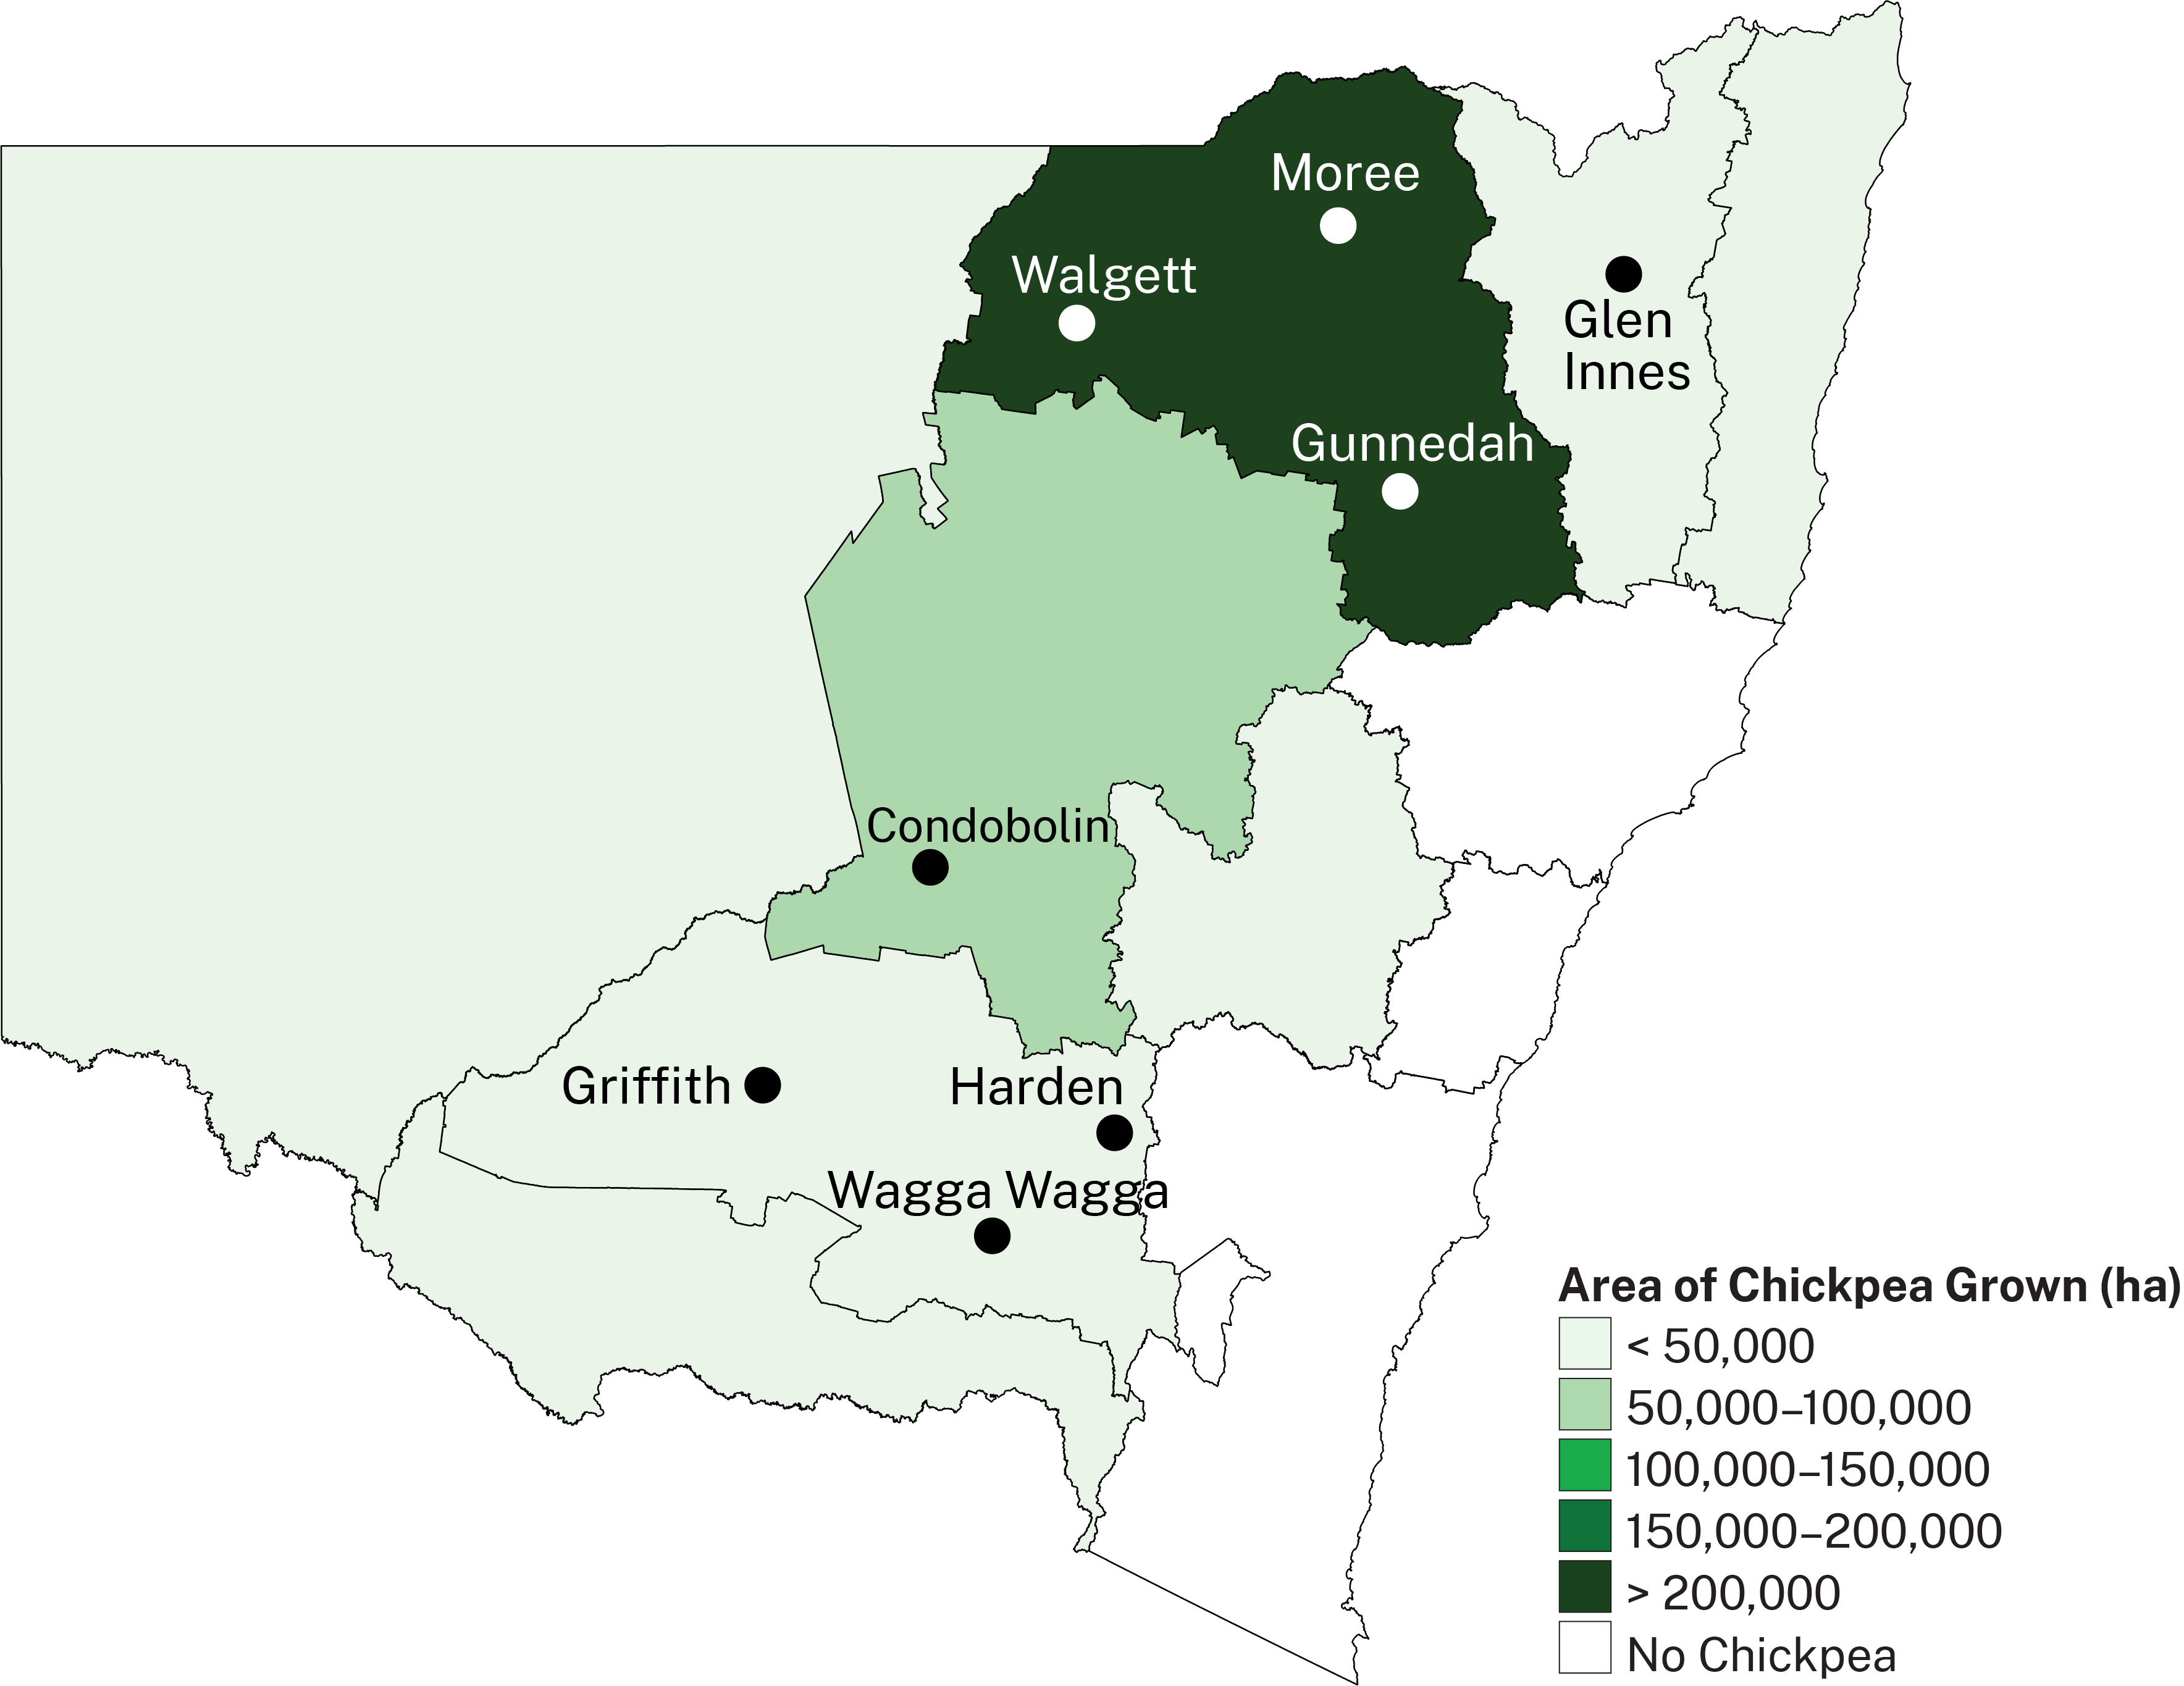 Chickpea growing in NSW is concentrated in the central northern part of the state but extends southwards west of the Great Dividing Range.